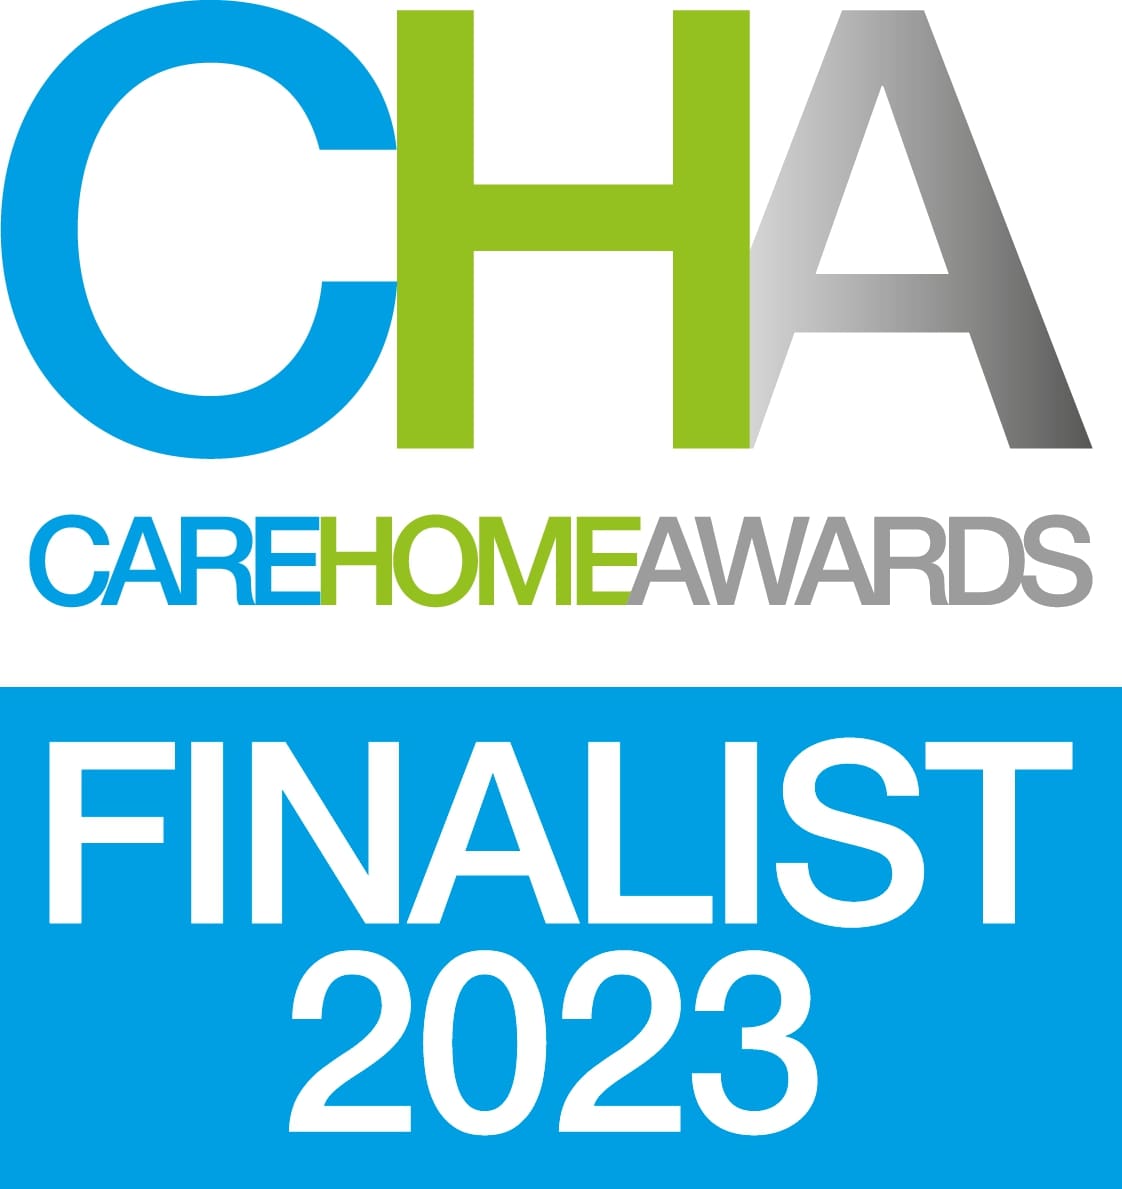 Care Home Awards 2023 Finalist - Best for Nutrition, Food and Dining 